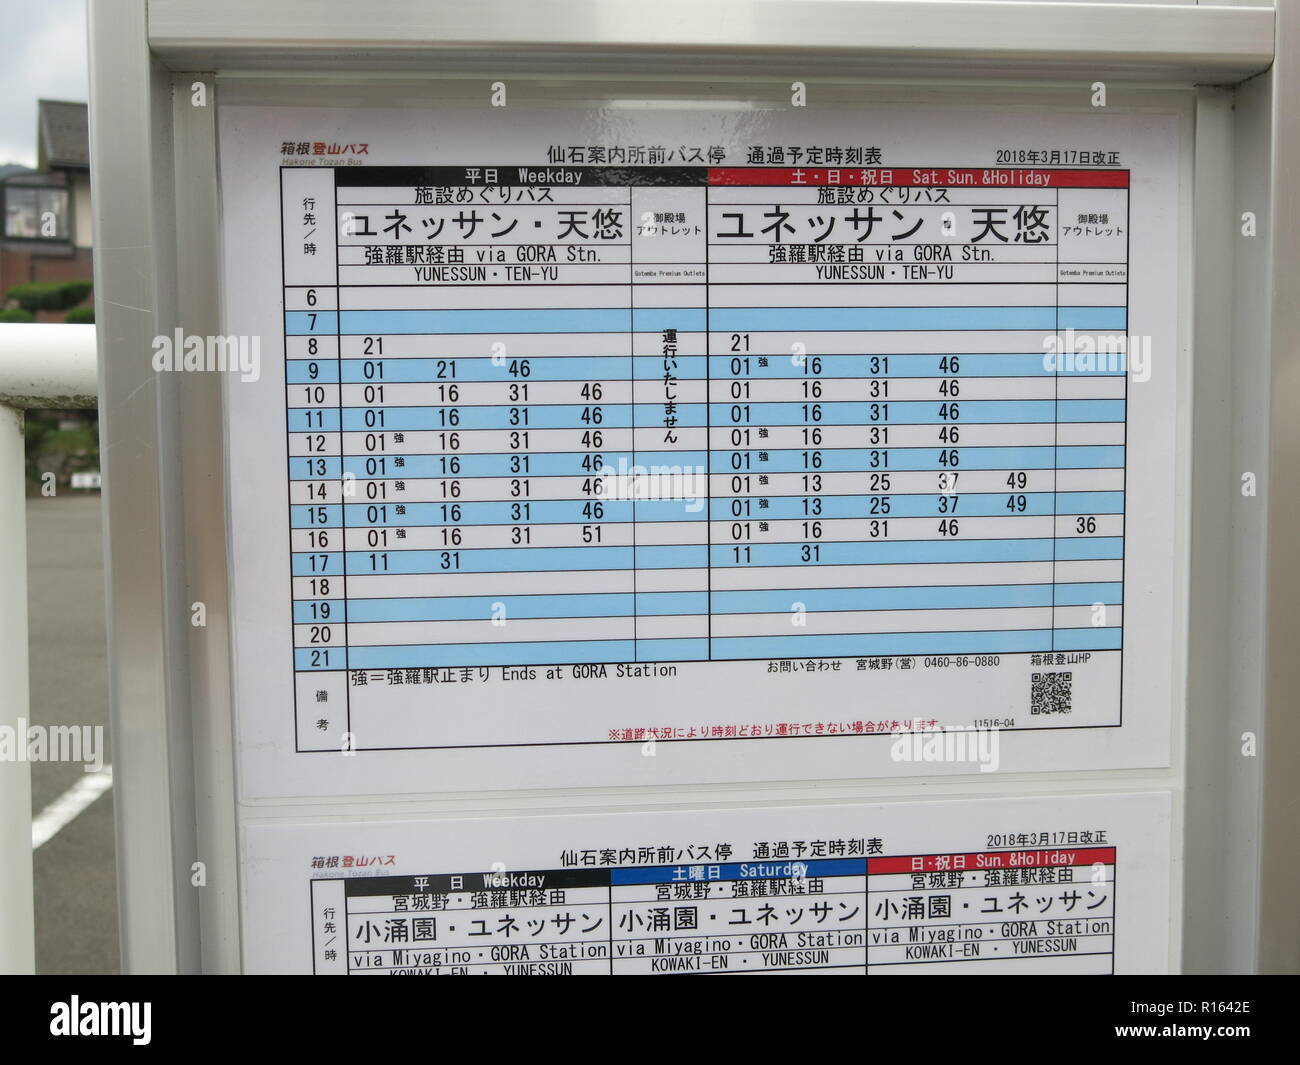 Close Up Of The Timetable At A Bus Stop By The Lalique Museum In The Hakone Region Of Japan Stock Photo Alamy